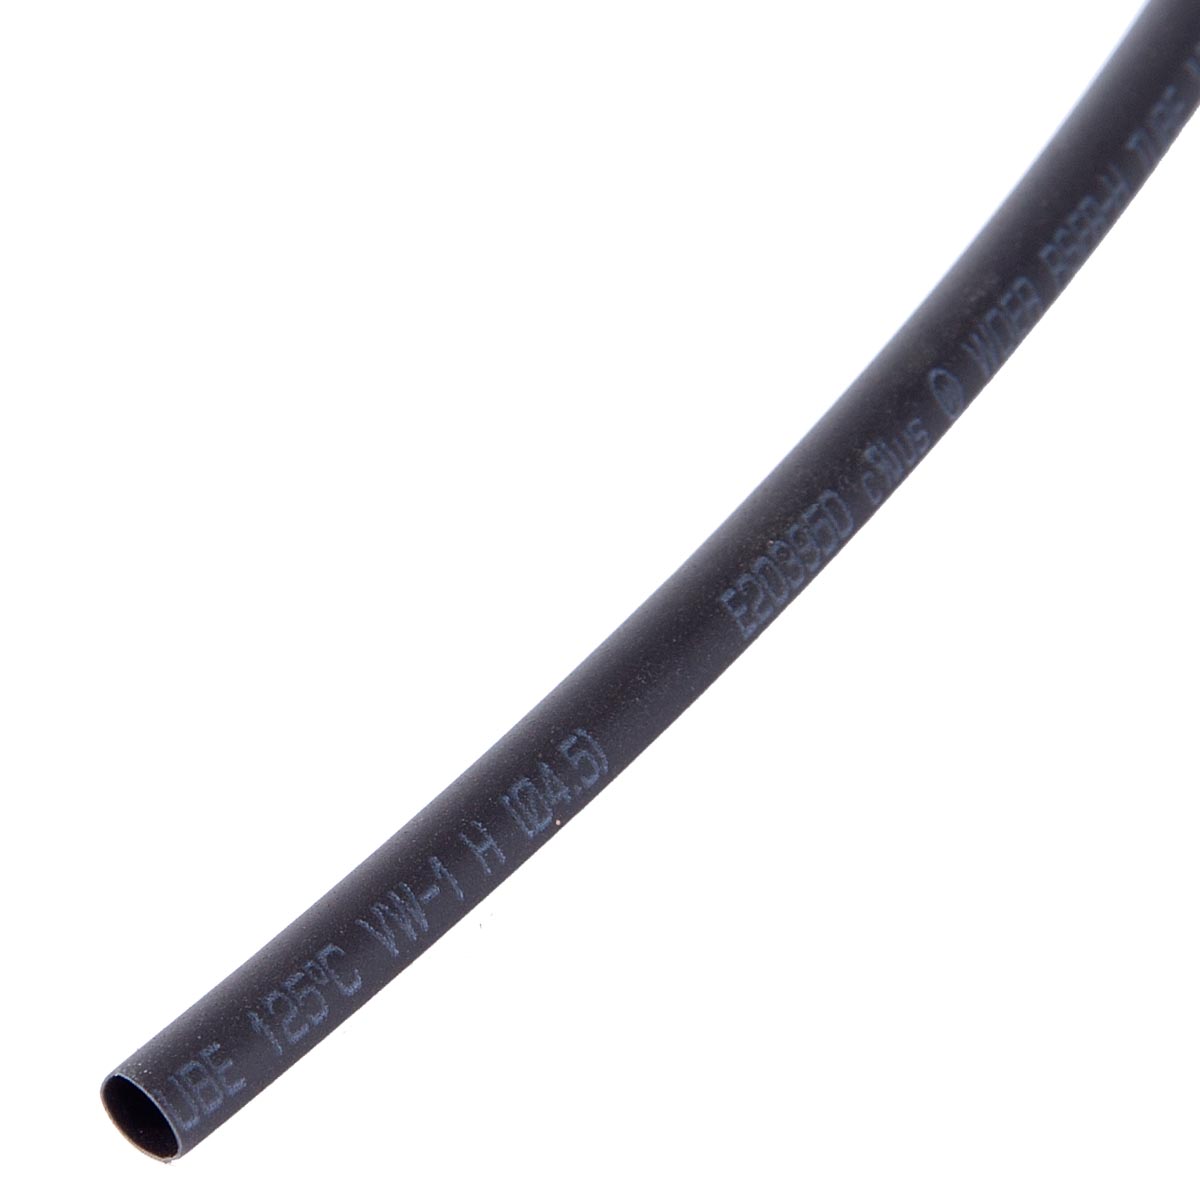 Heat Shrink Electrical Insulation Tubing - 3/16" dia., Sold Per Foot